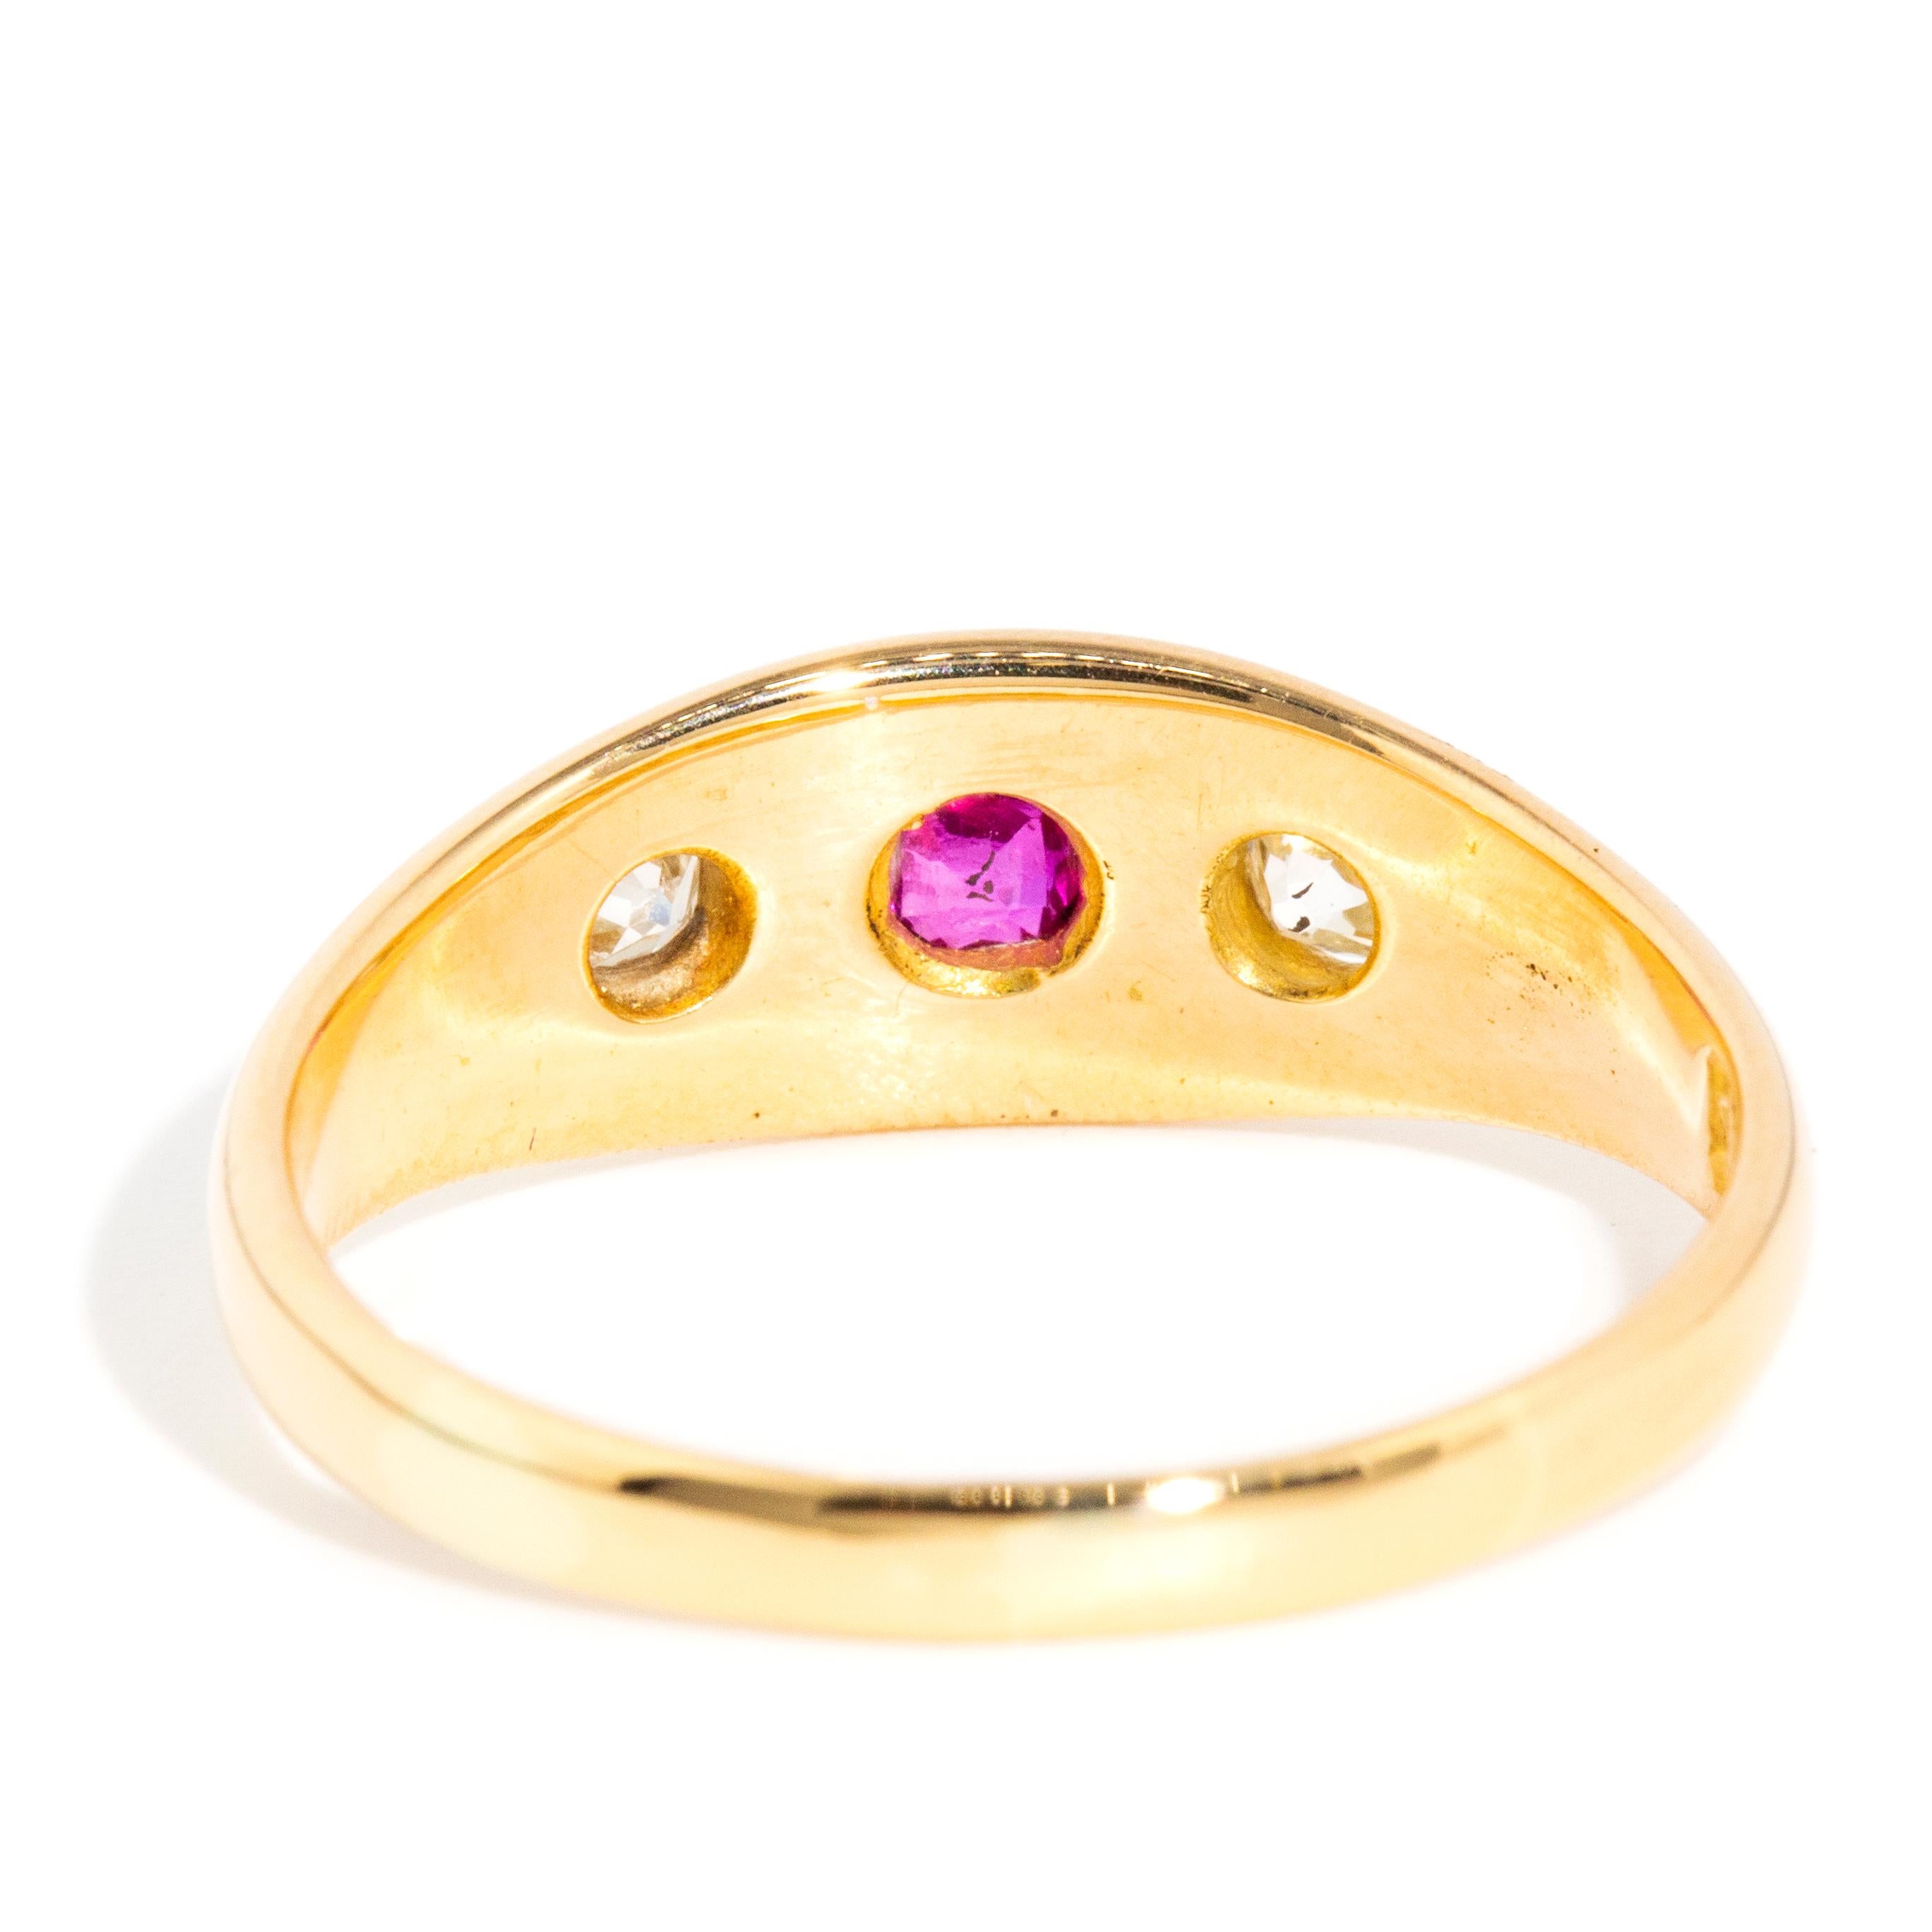 Antique Victorian Era Bright Red Pink Ruby & Old Cut Diamond Ring 18 Carat Gold For Sale 3